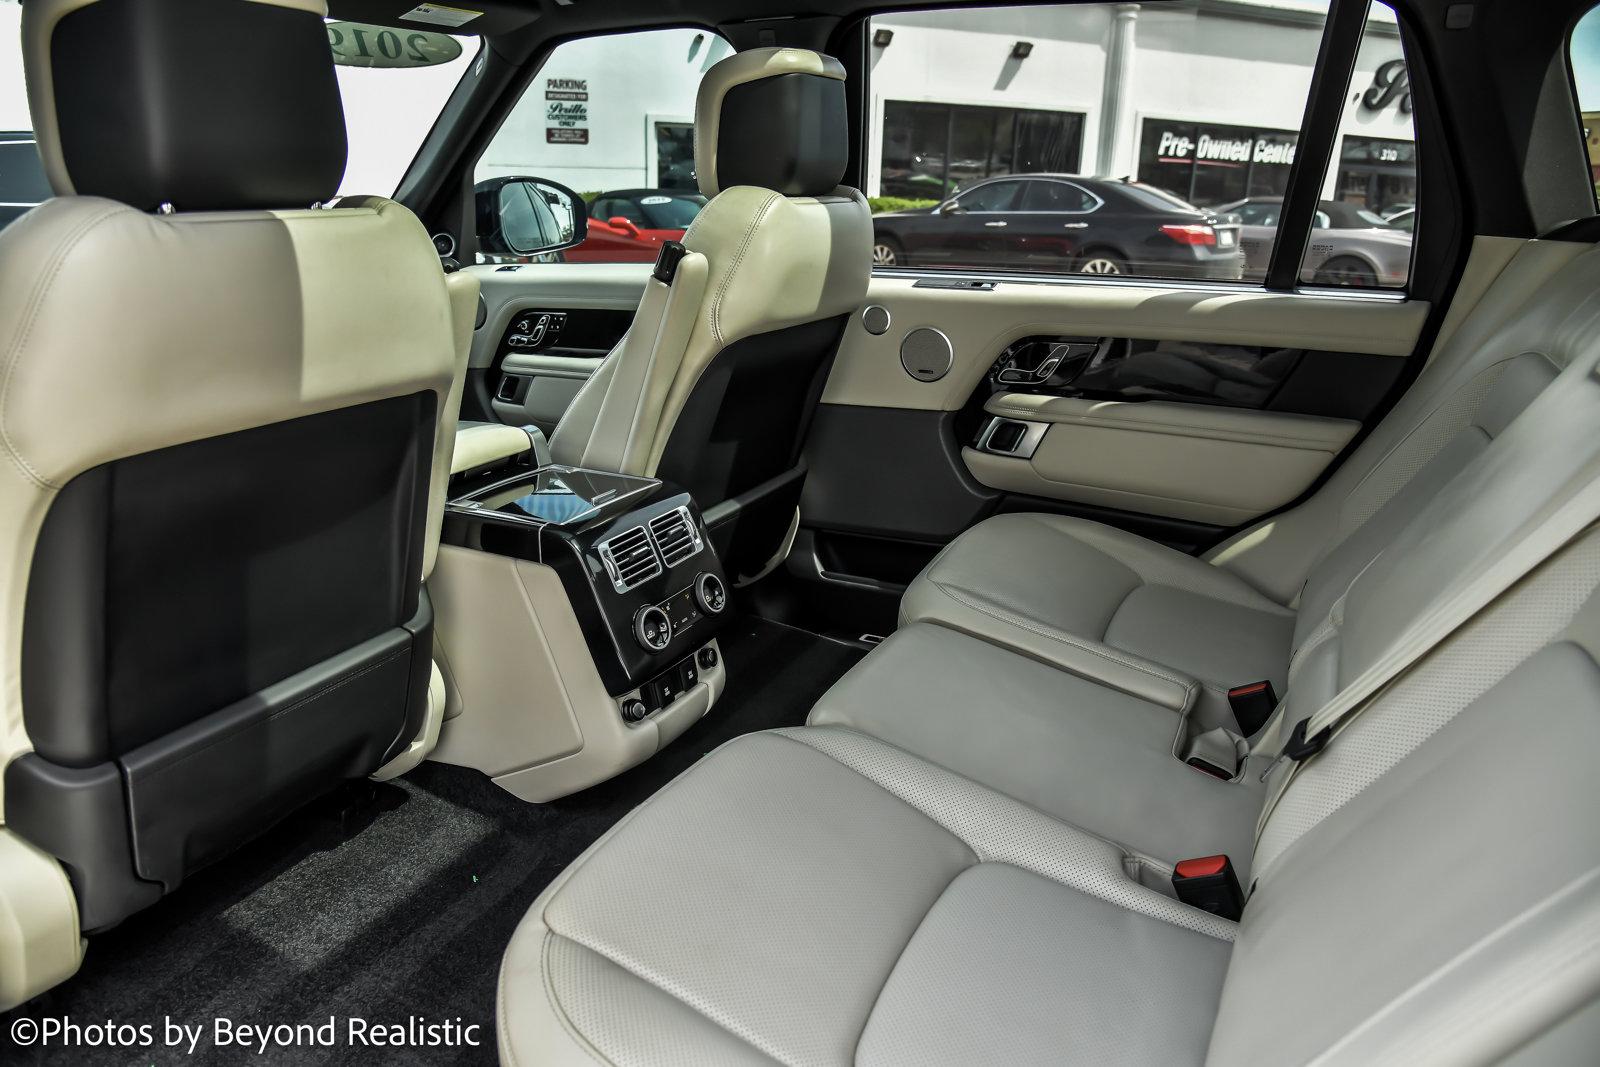 Used 2019 Land Rover Range Rover LWB 5.0 Supercharged | Downers Grove, IL